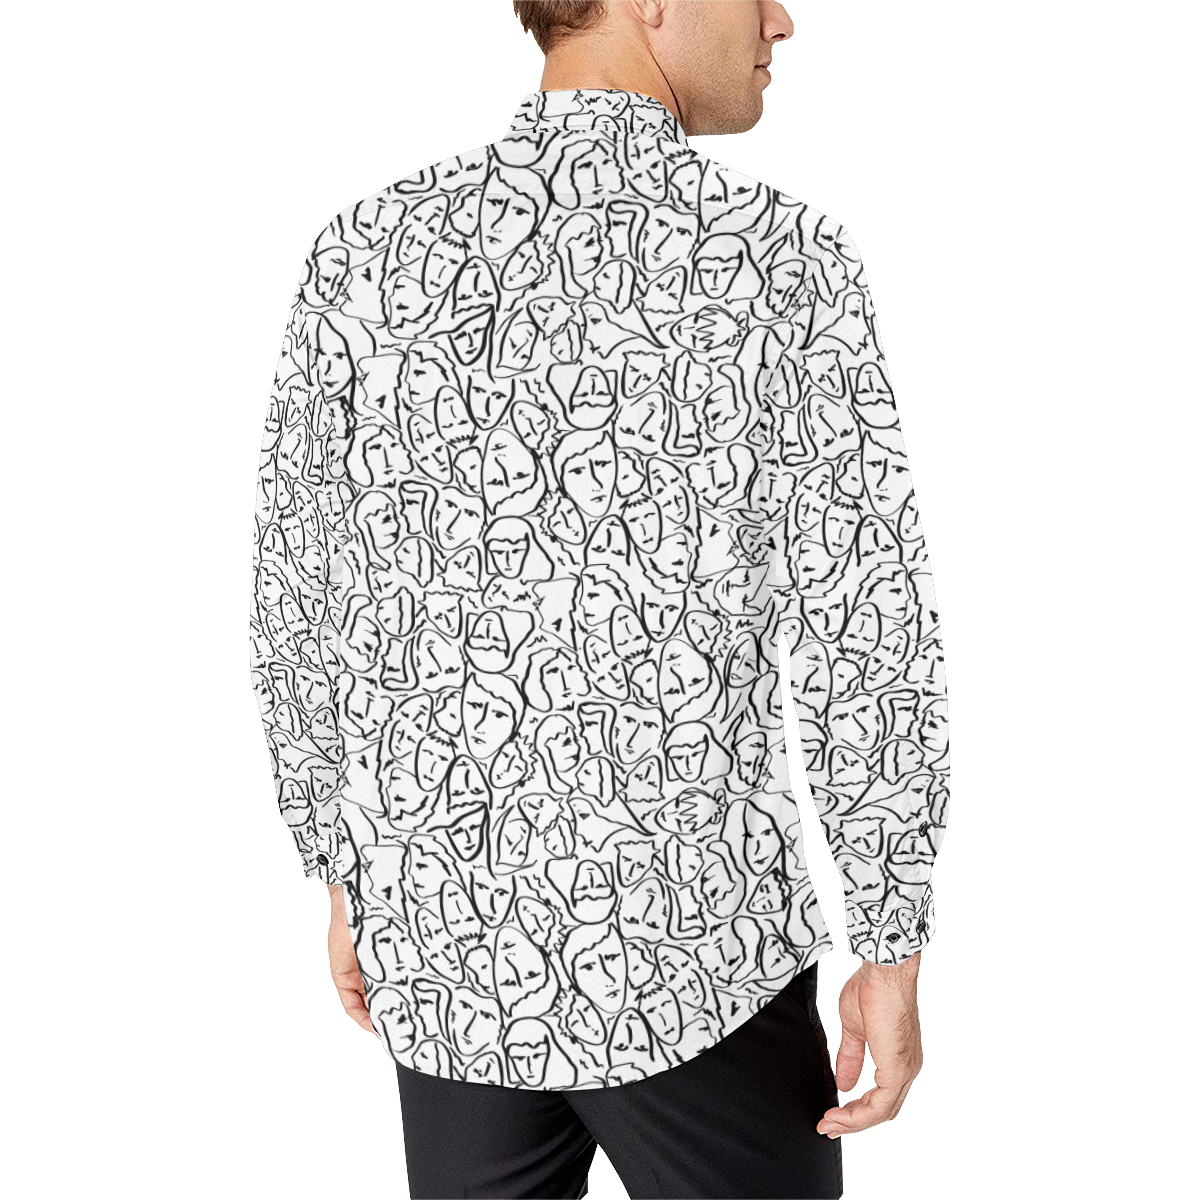 CMBYN Elio Shirt Faces Black Design on White Men's All Over Print Casual Dress Shirt (Model T61)